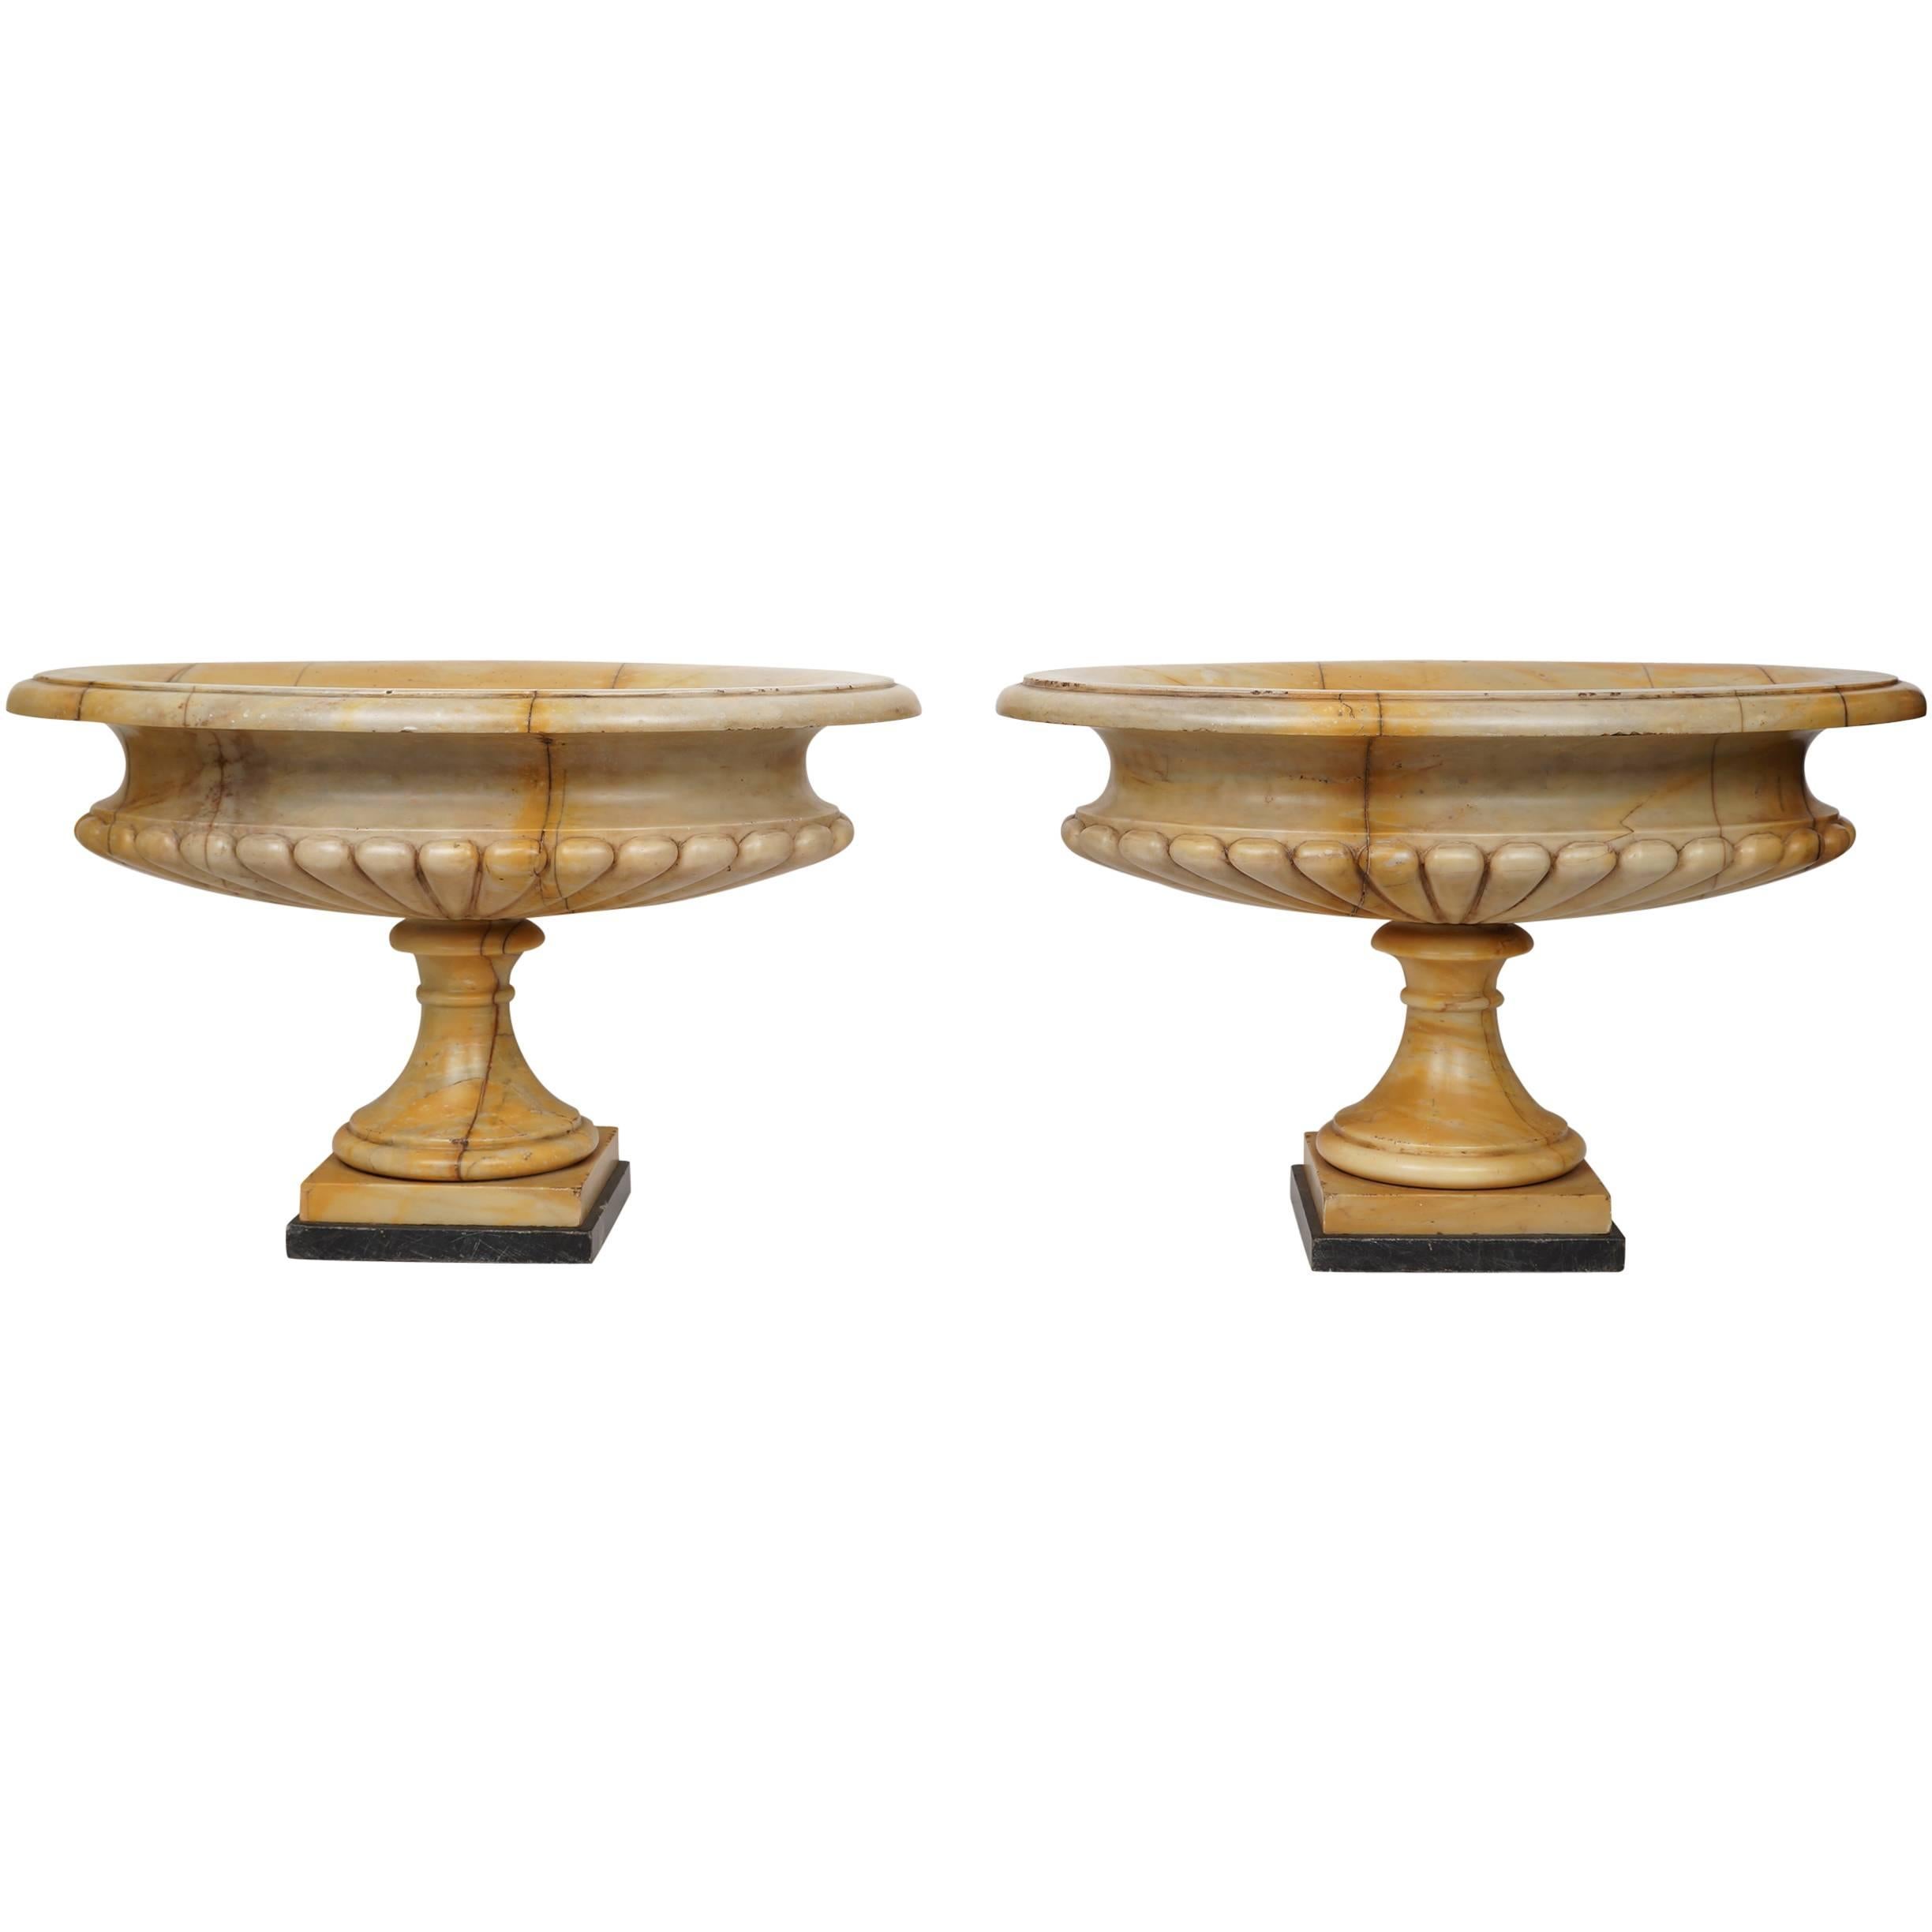 Oval Pair of Neoclassical Marble Footed Centrepiece Tazza Bowls